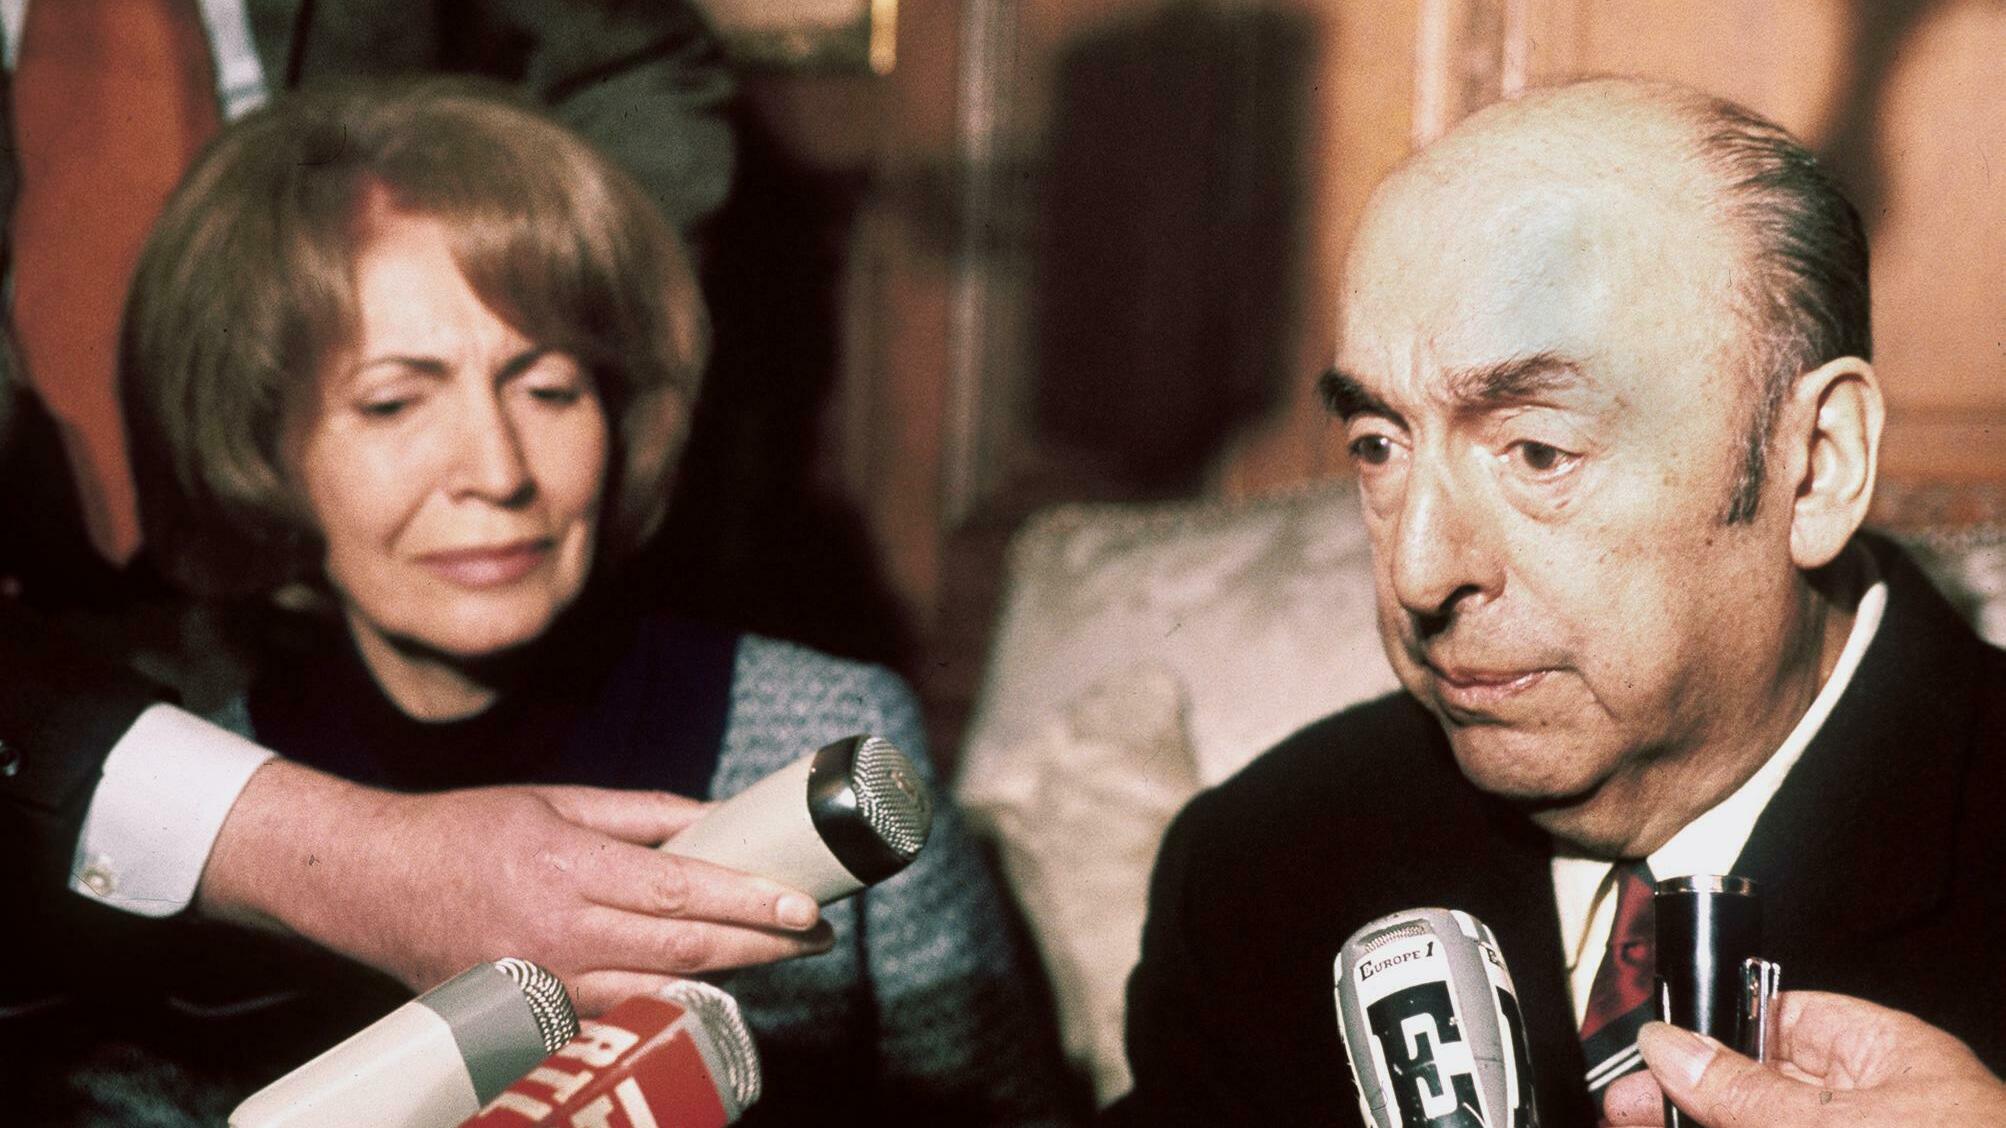 Pablo Neruda giving an interview to the press